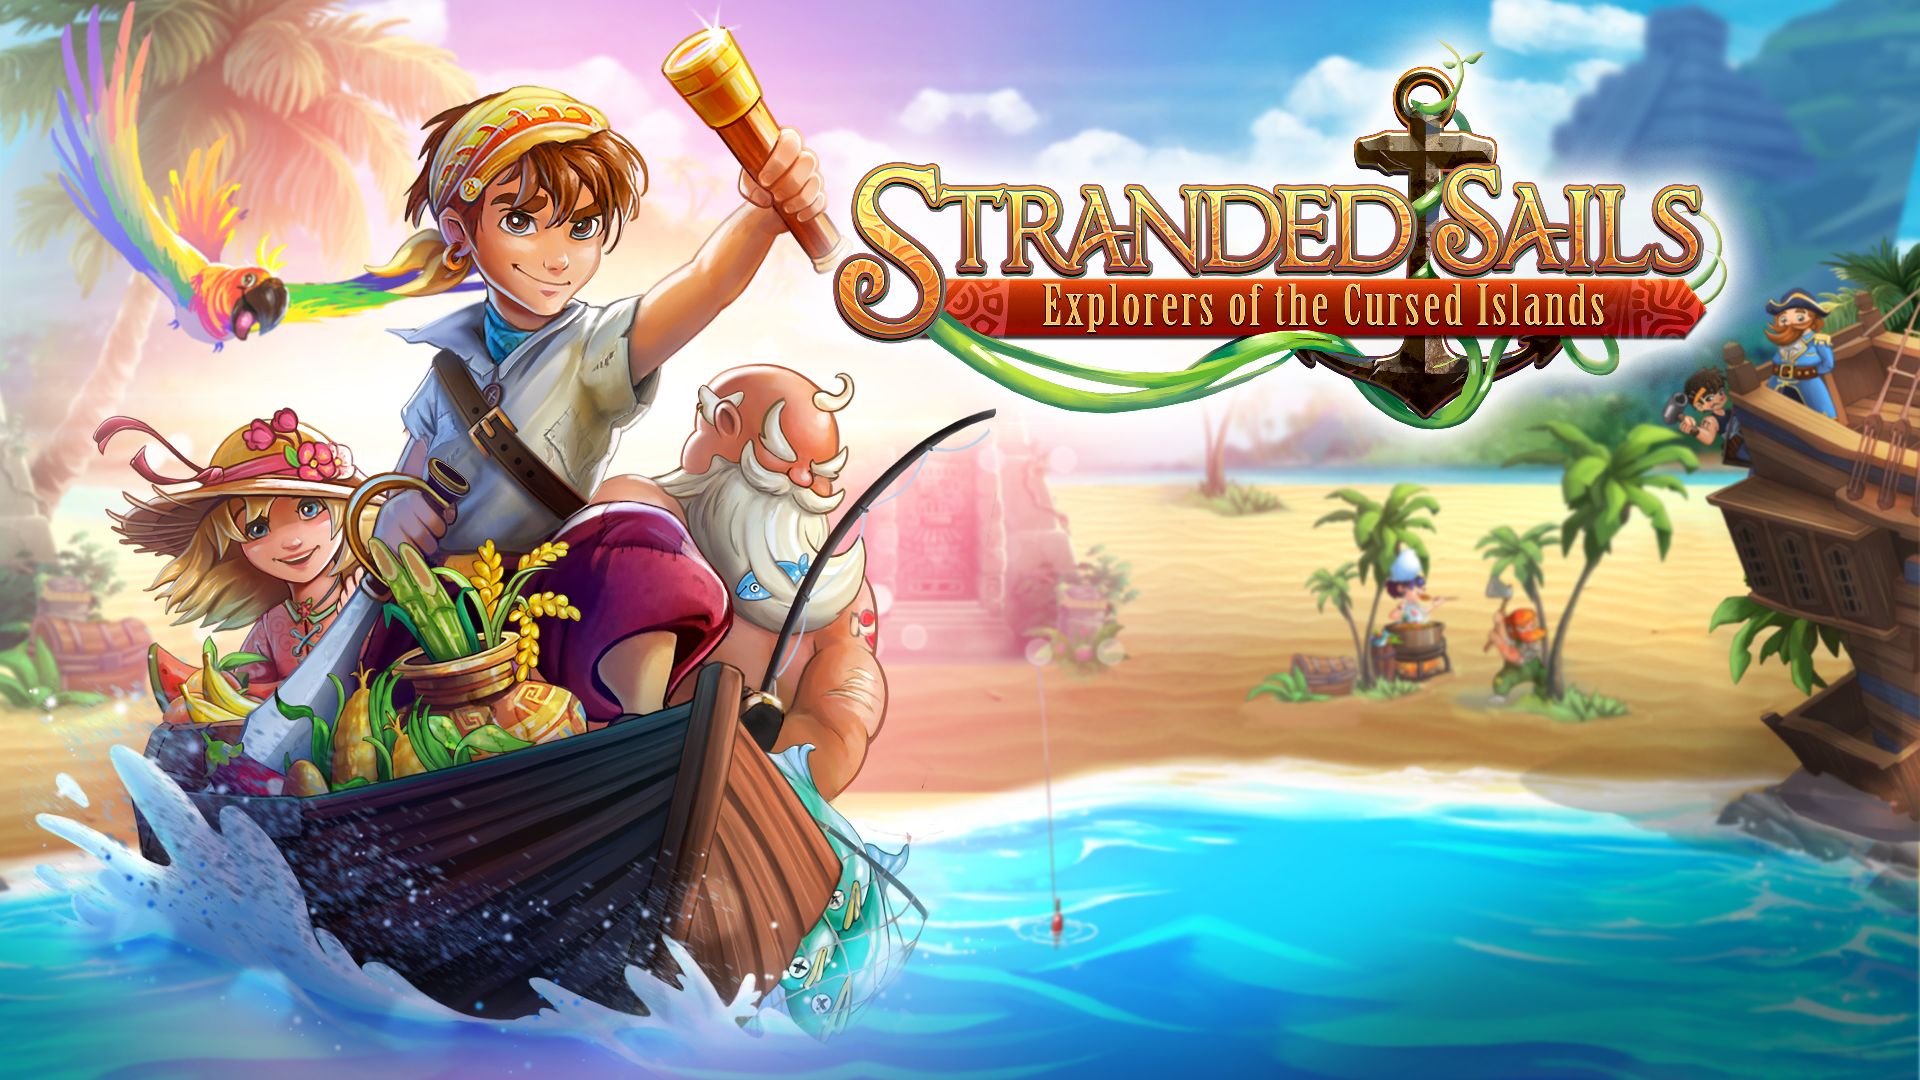 Video For 5 Survival Tips for Open World Adventure Stranded Sails – Explorers of the Cursed Islands, Available Now on Xbox One